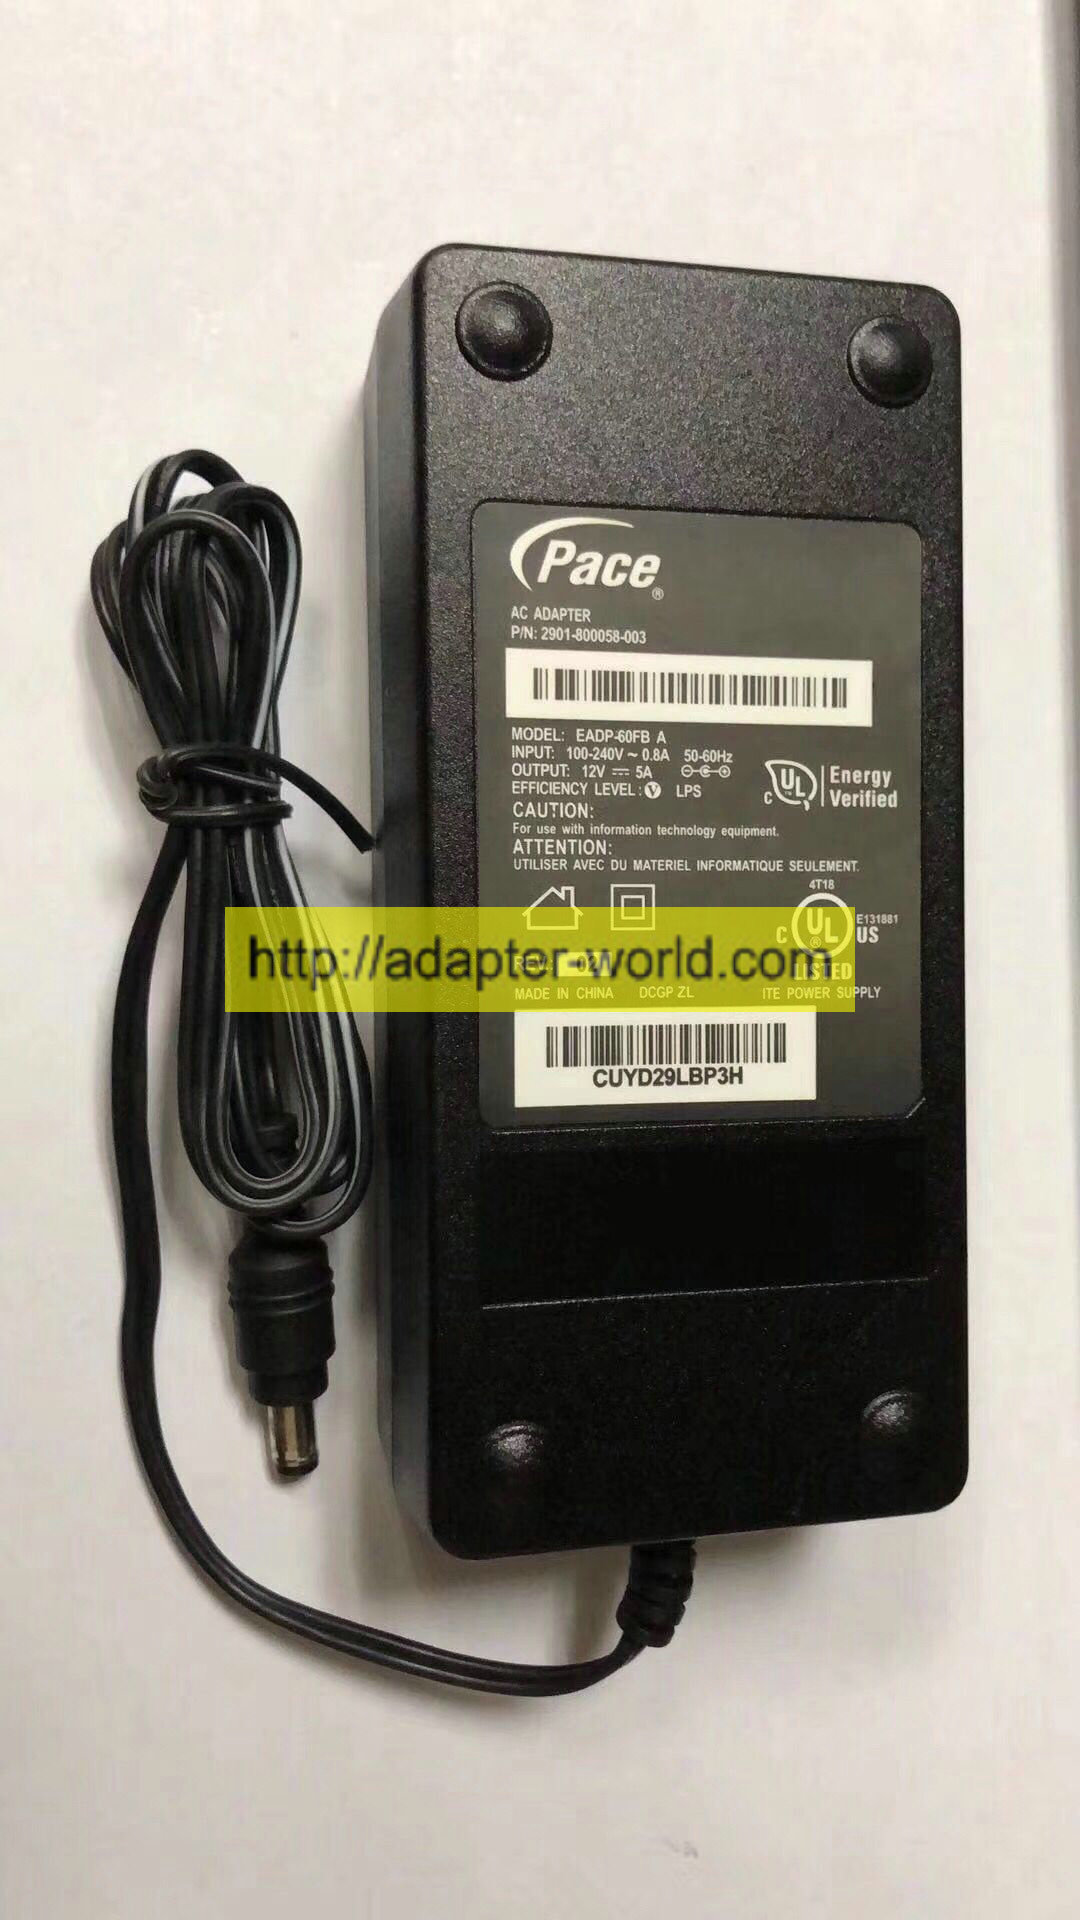 *100% Brand NEW* Pace 12V--5A MODEL:EADP-60FB A P/N:2901-800058-003 AC ADAPTER Power Adapter Free shipping!